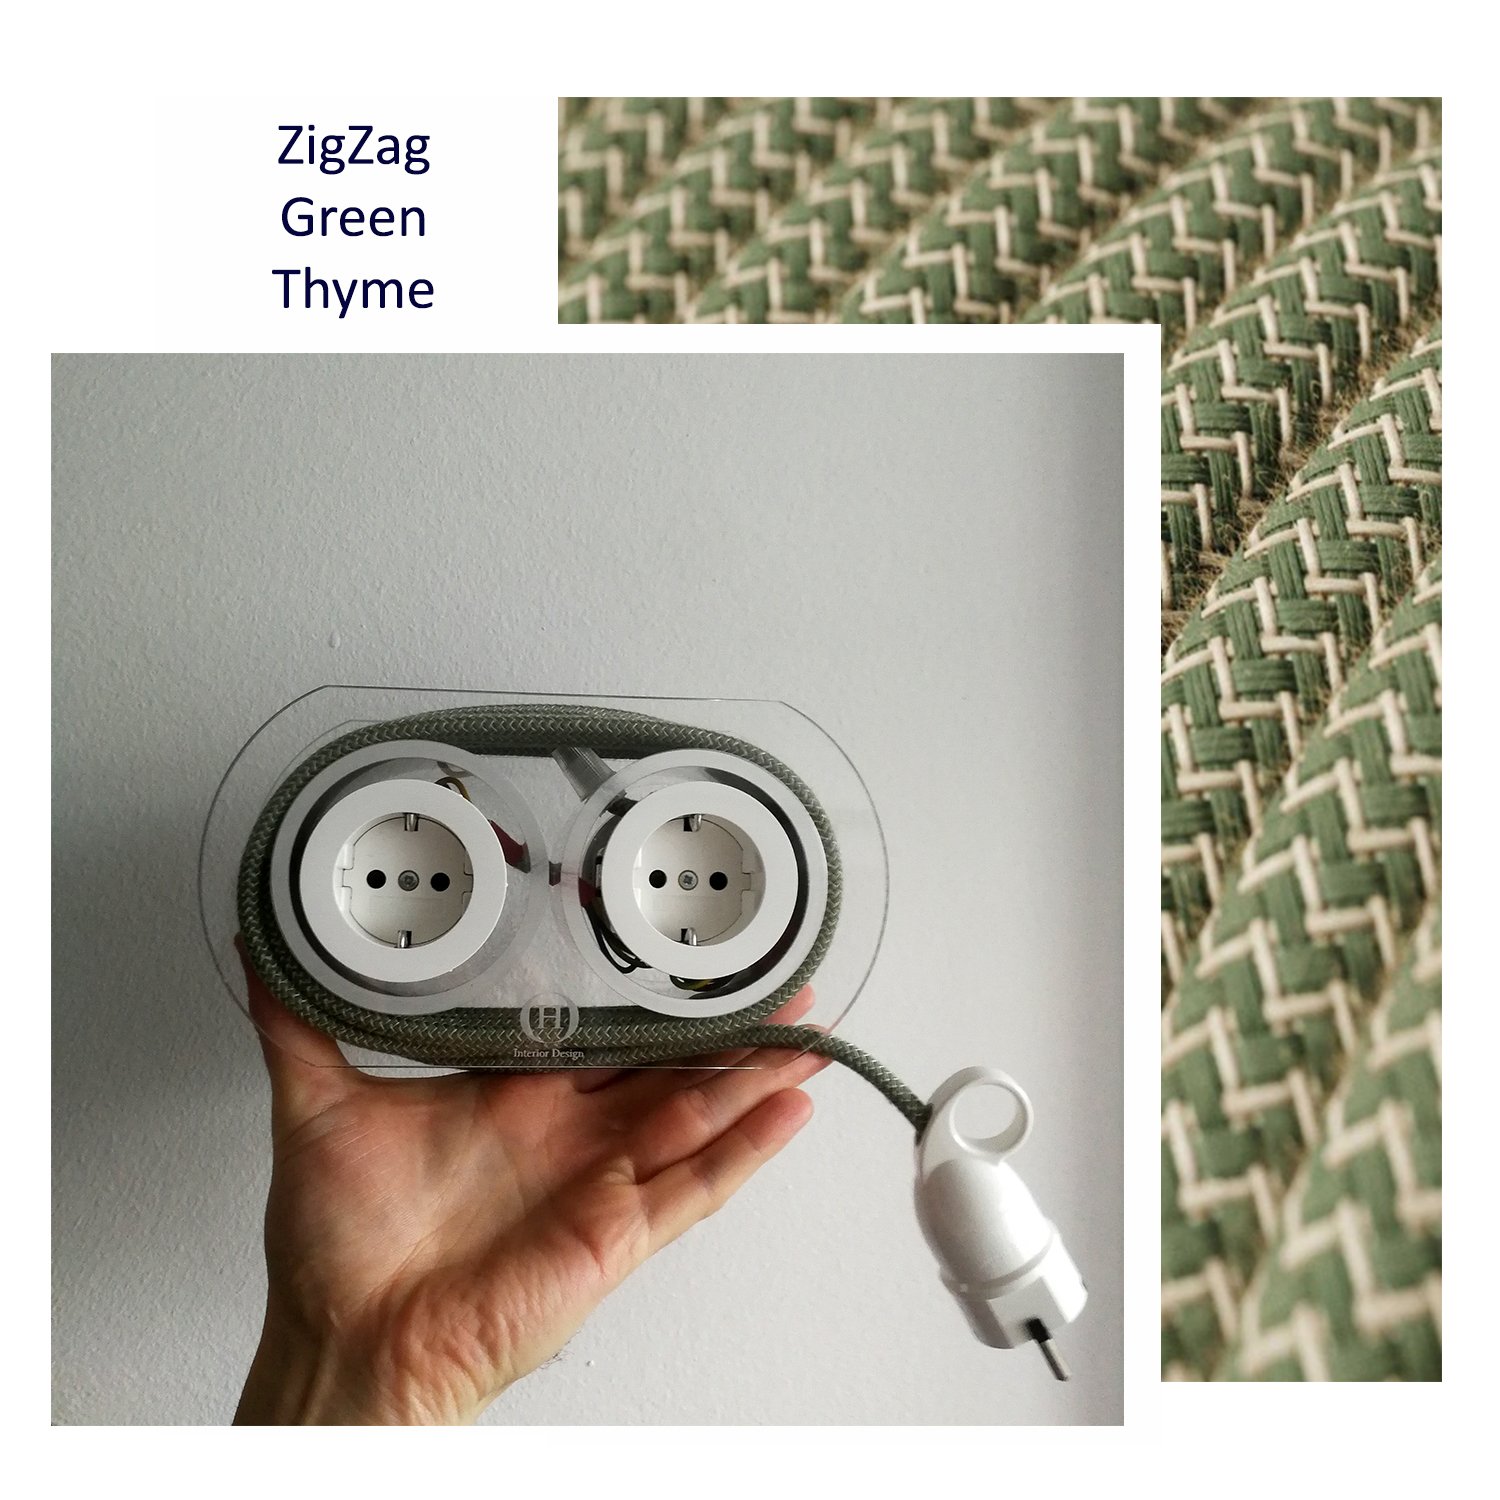 Extension Cord for 4 Plugs_ZigZag Green Thyme.jpg